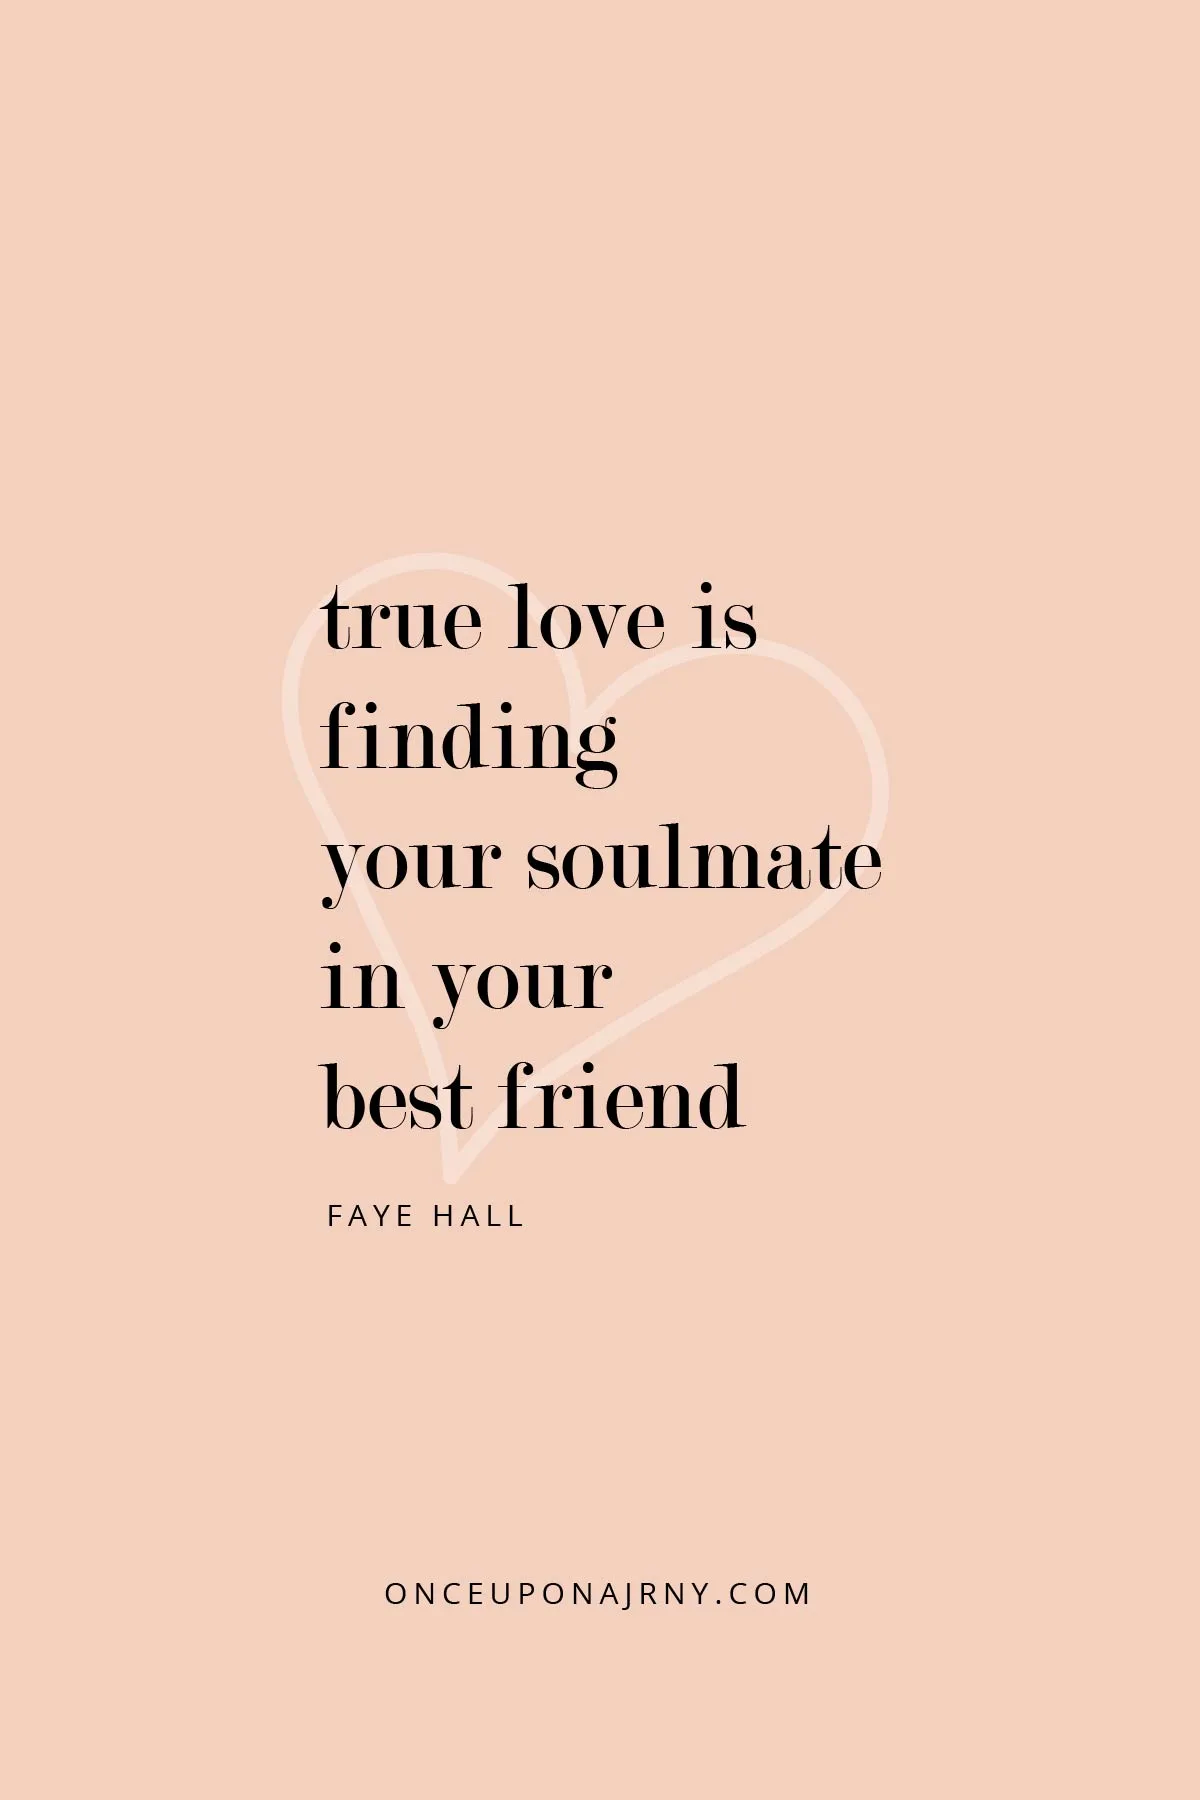 True love is finding your soulmate in your best friend. - Faye Hall lgbtq quotes